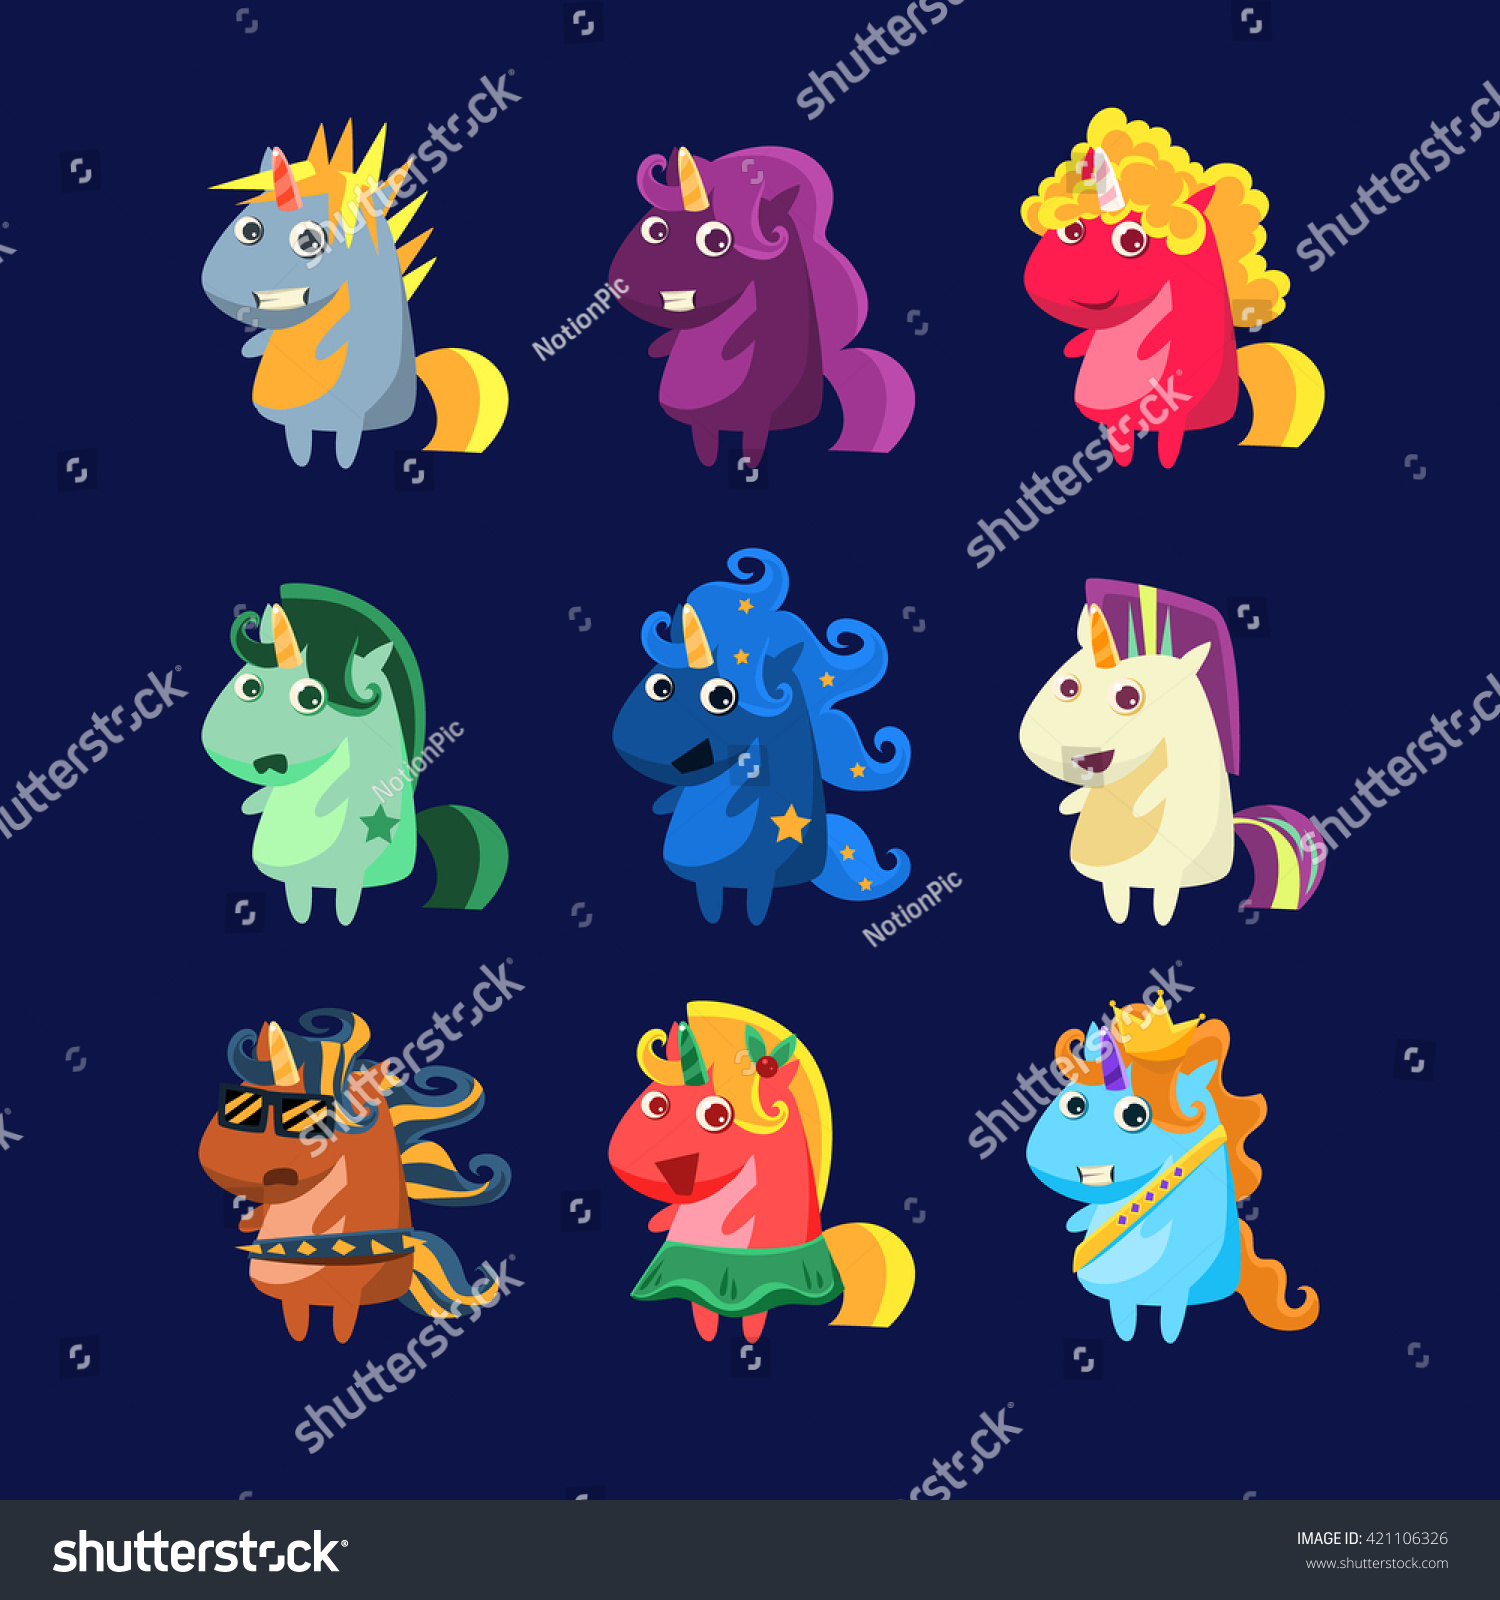 SVG of Unicorns In Costumes Set Of Flat Bright Color Childish Cartoon Design Vector Illustrations Isolated On Dark Background svg